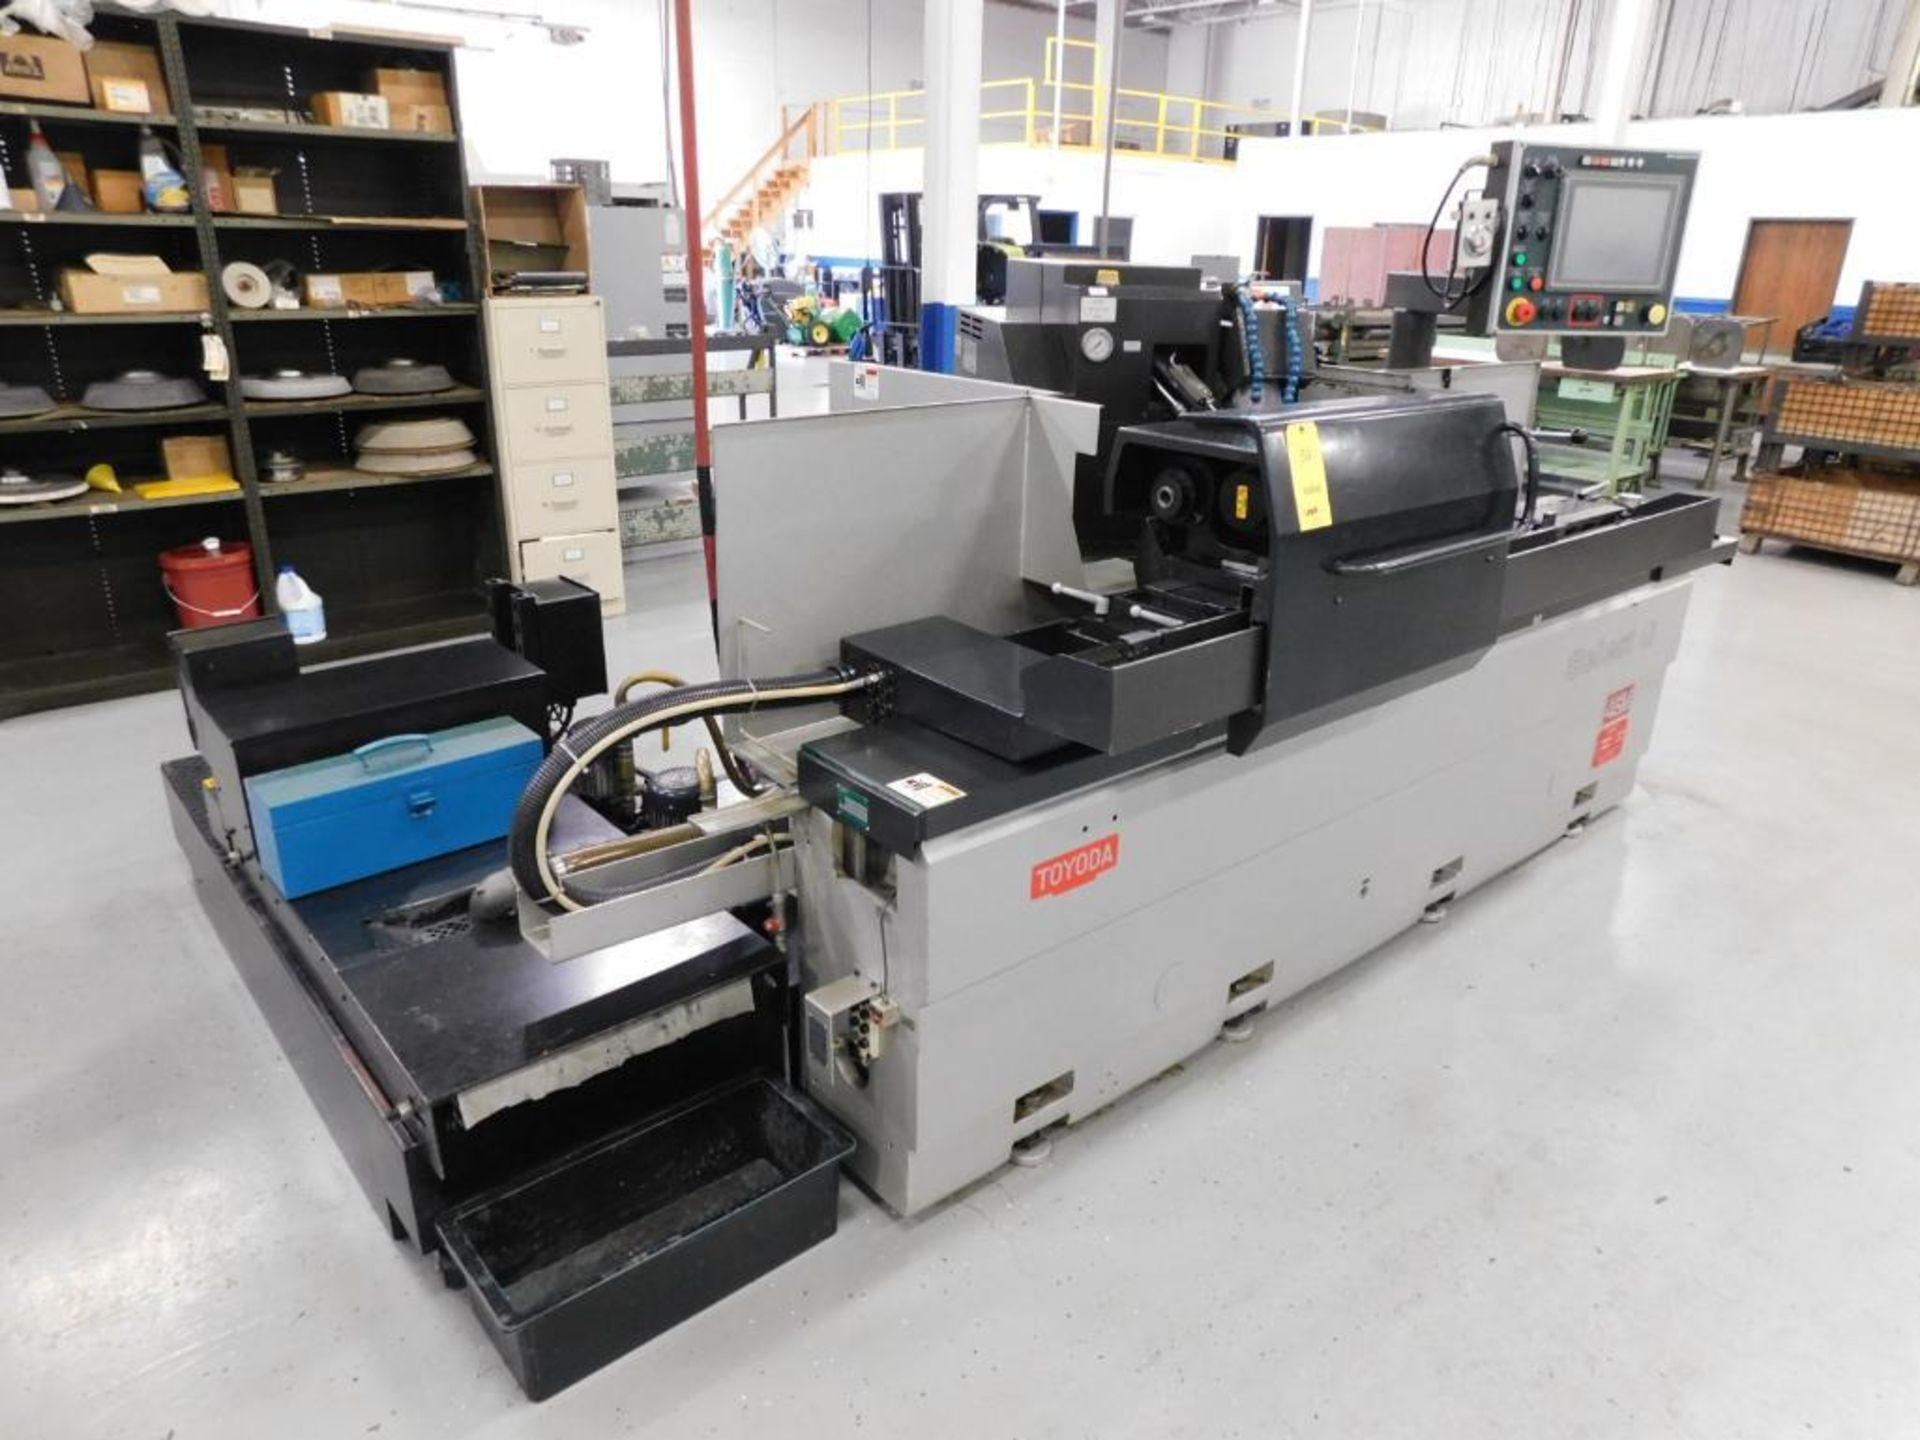 2013 Toyoda Select G-100 II CNC Universal Cylindrical Grinder, 320mm Swing Over Table, 1000mm Distan - Image 7 of 9